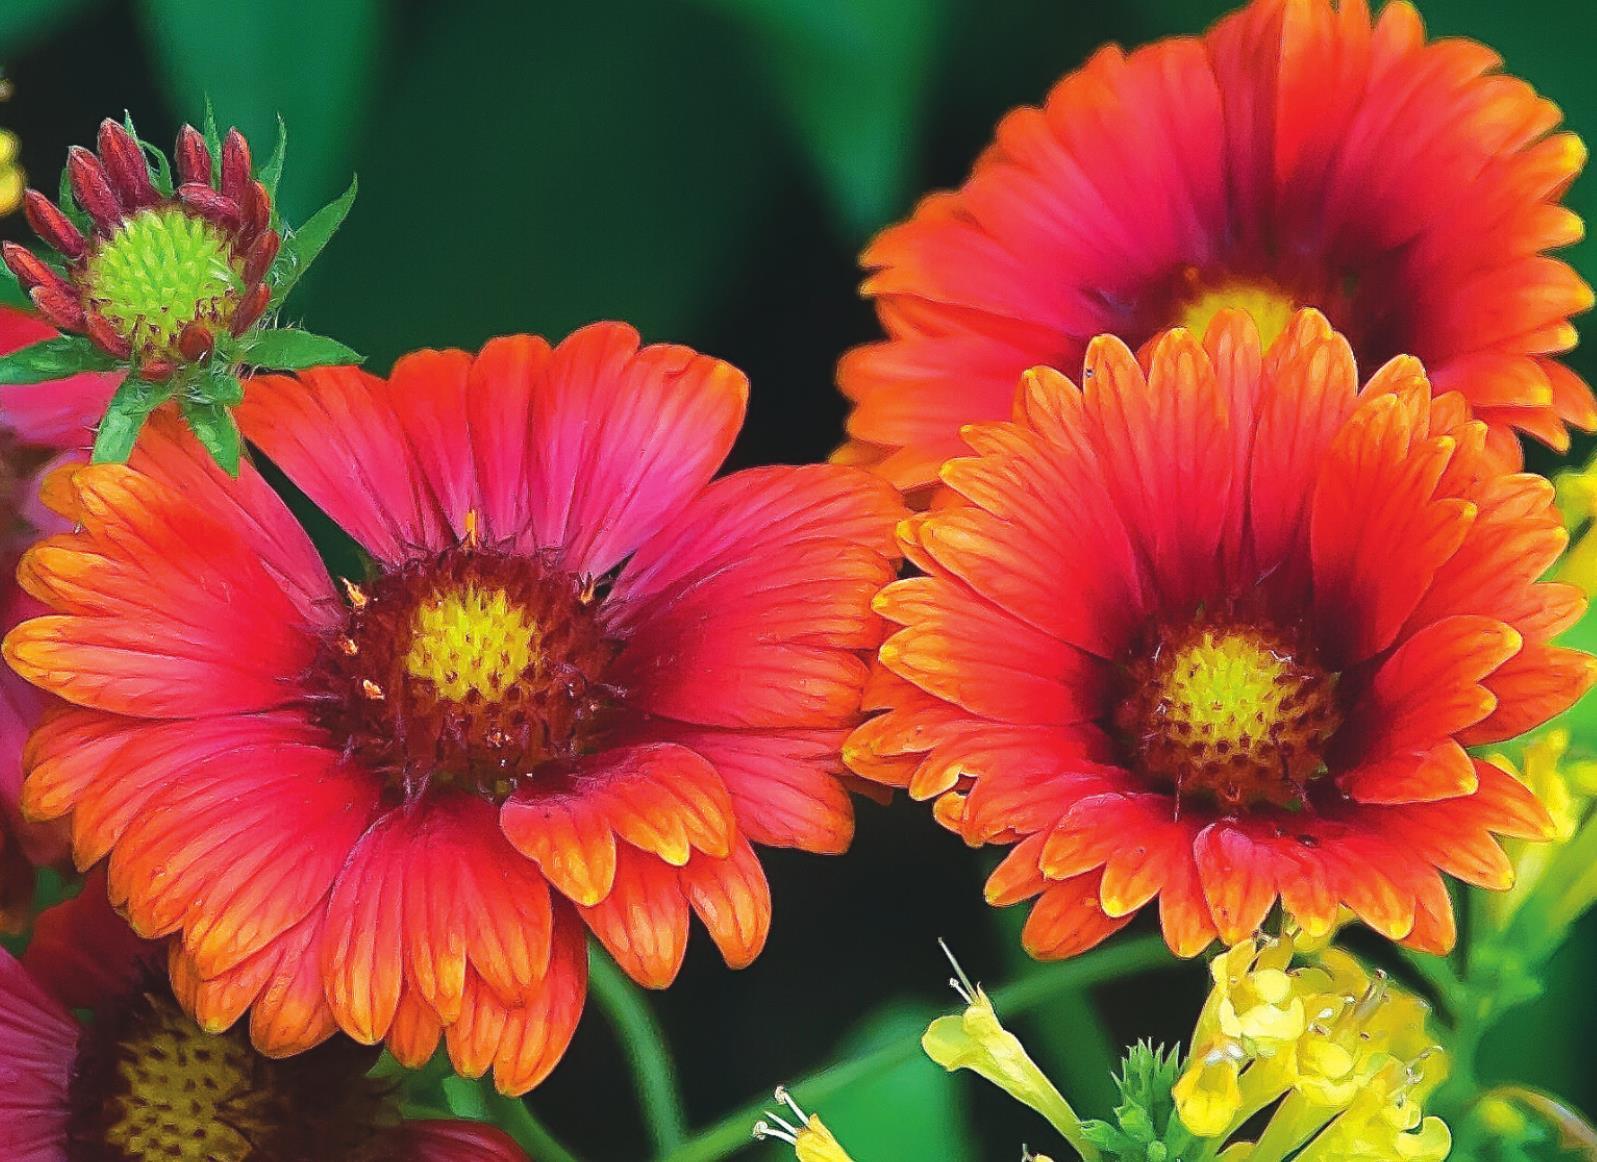 Get your sunny disposition on by planning your garden with ‘Heat It Up’ Blanket Flowers